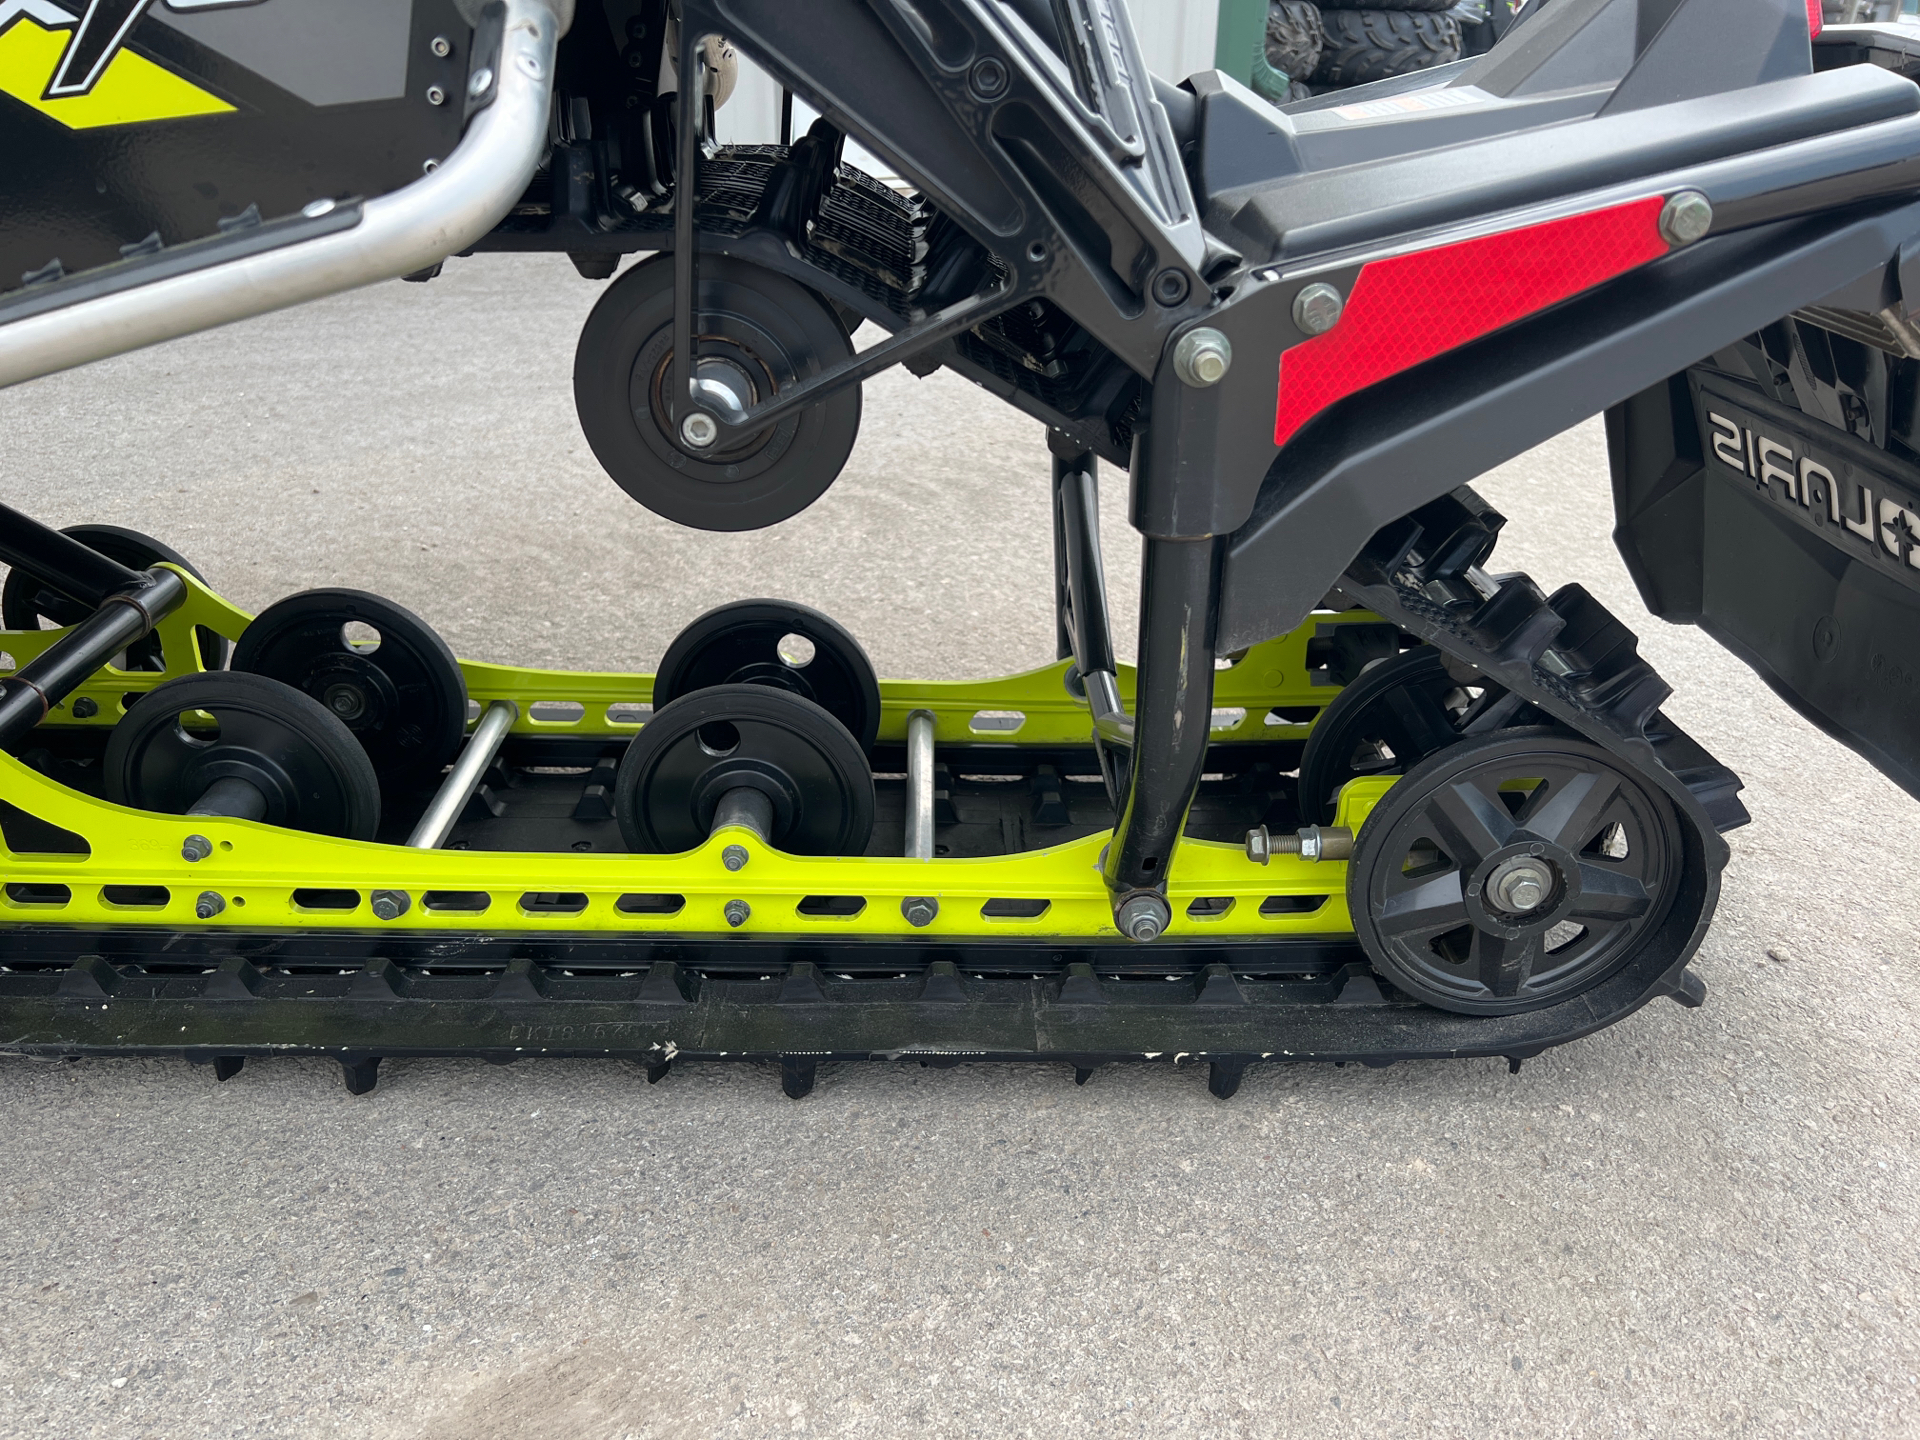 2019 Polaris 800 Switchback Pro-S SnowCheck Select in Elkhorn, Wisconsin - Photo 5